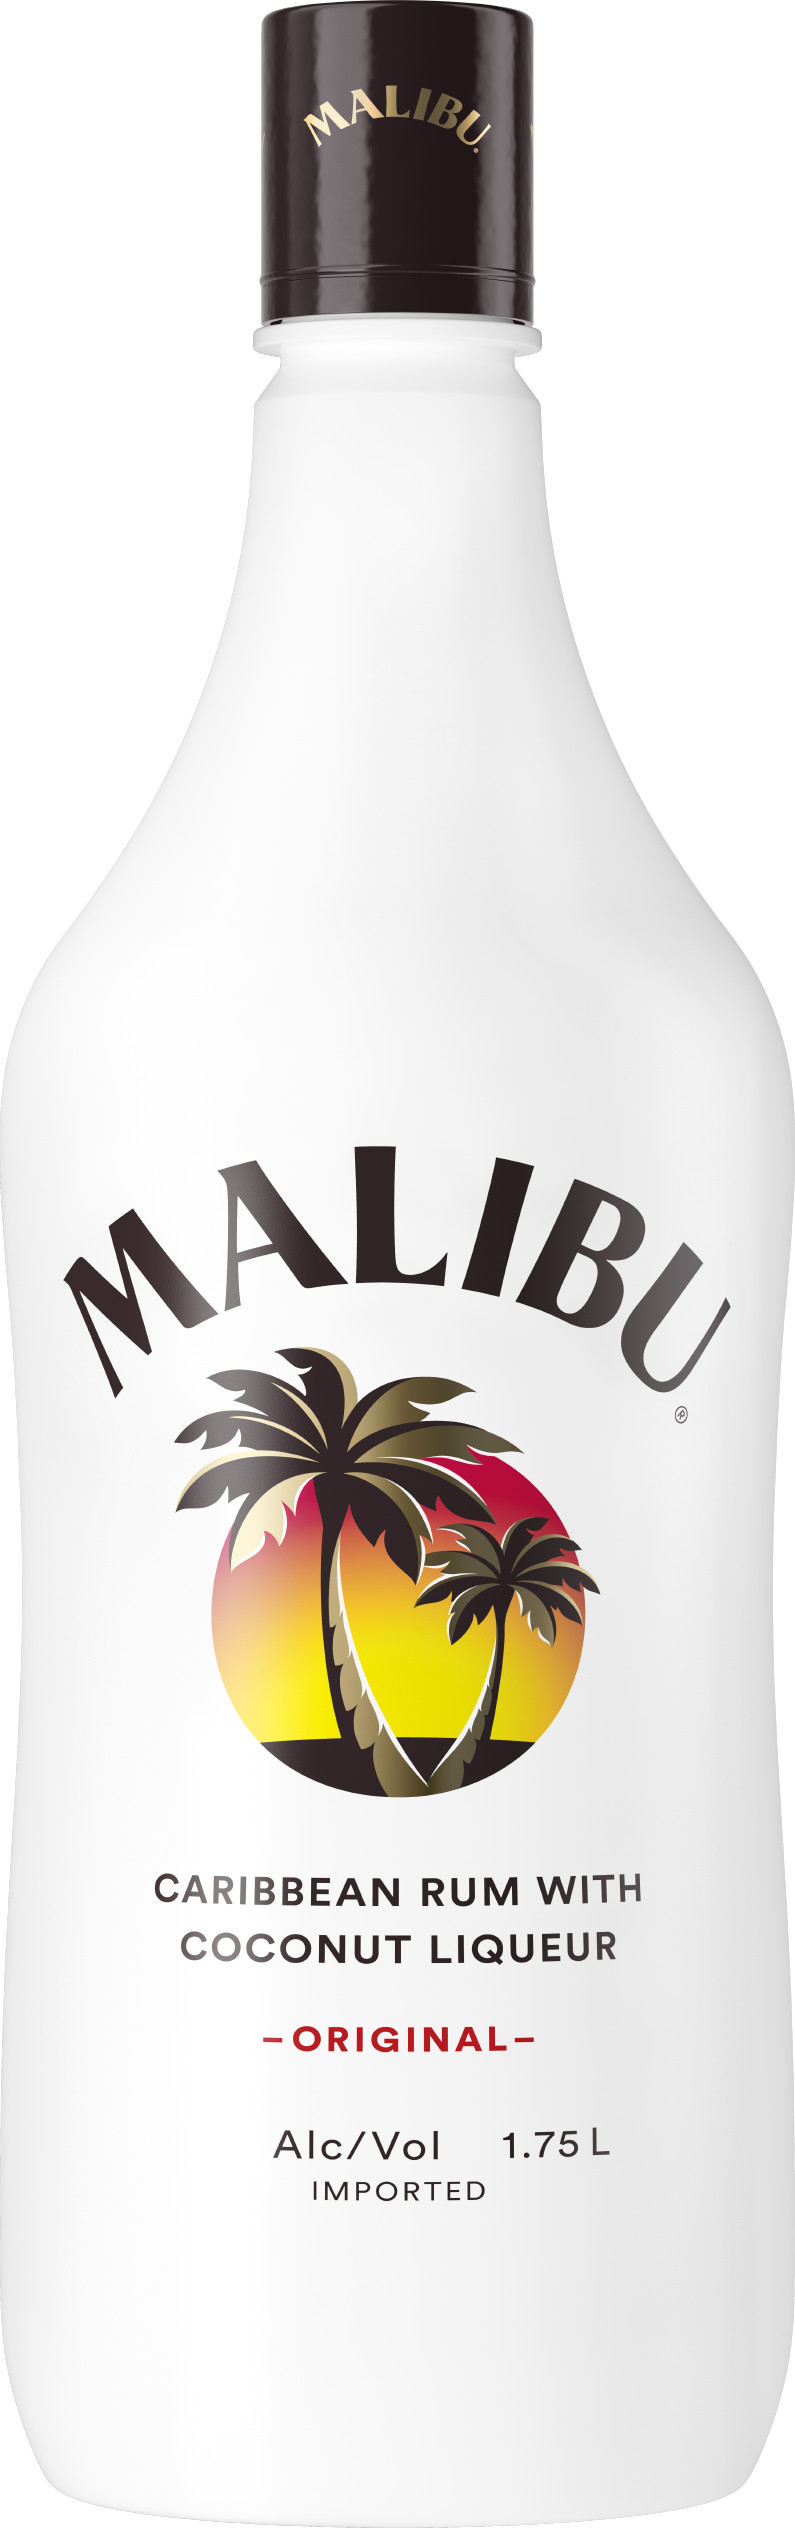 Is Your Malibu Rum Still Good? Find Out Now!